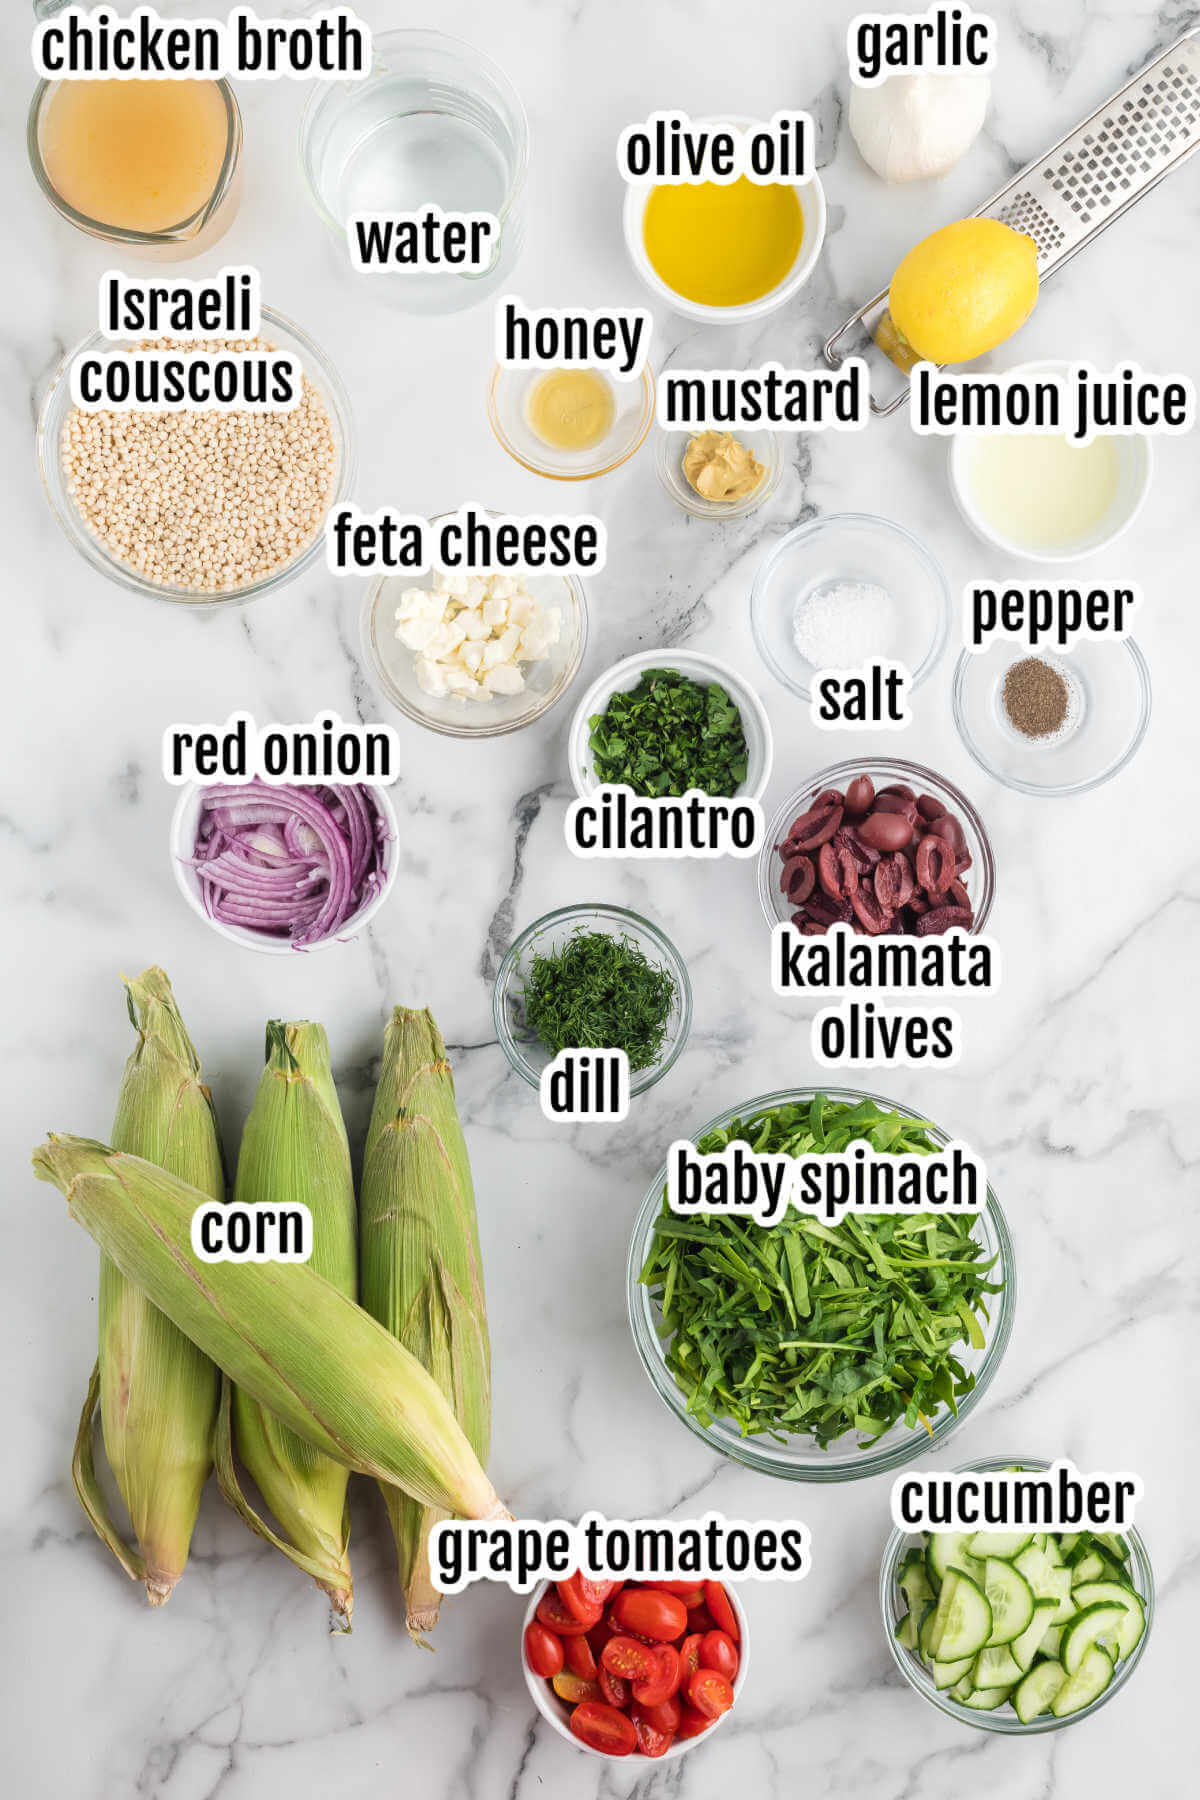 Image of the ingredients needed to make the Israeli couscous salad with Mediterranean vegetables and seasoning. 